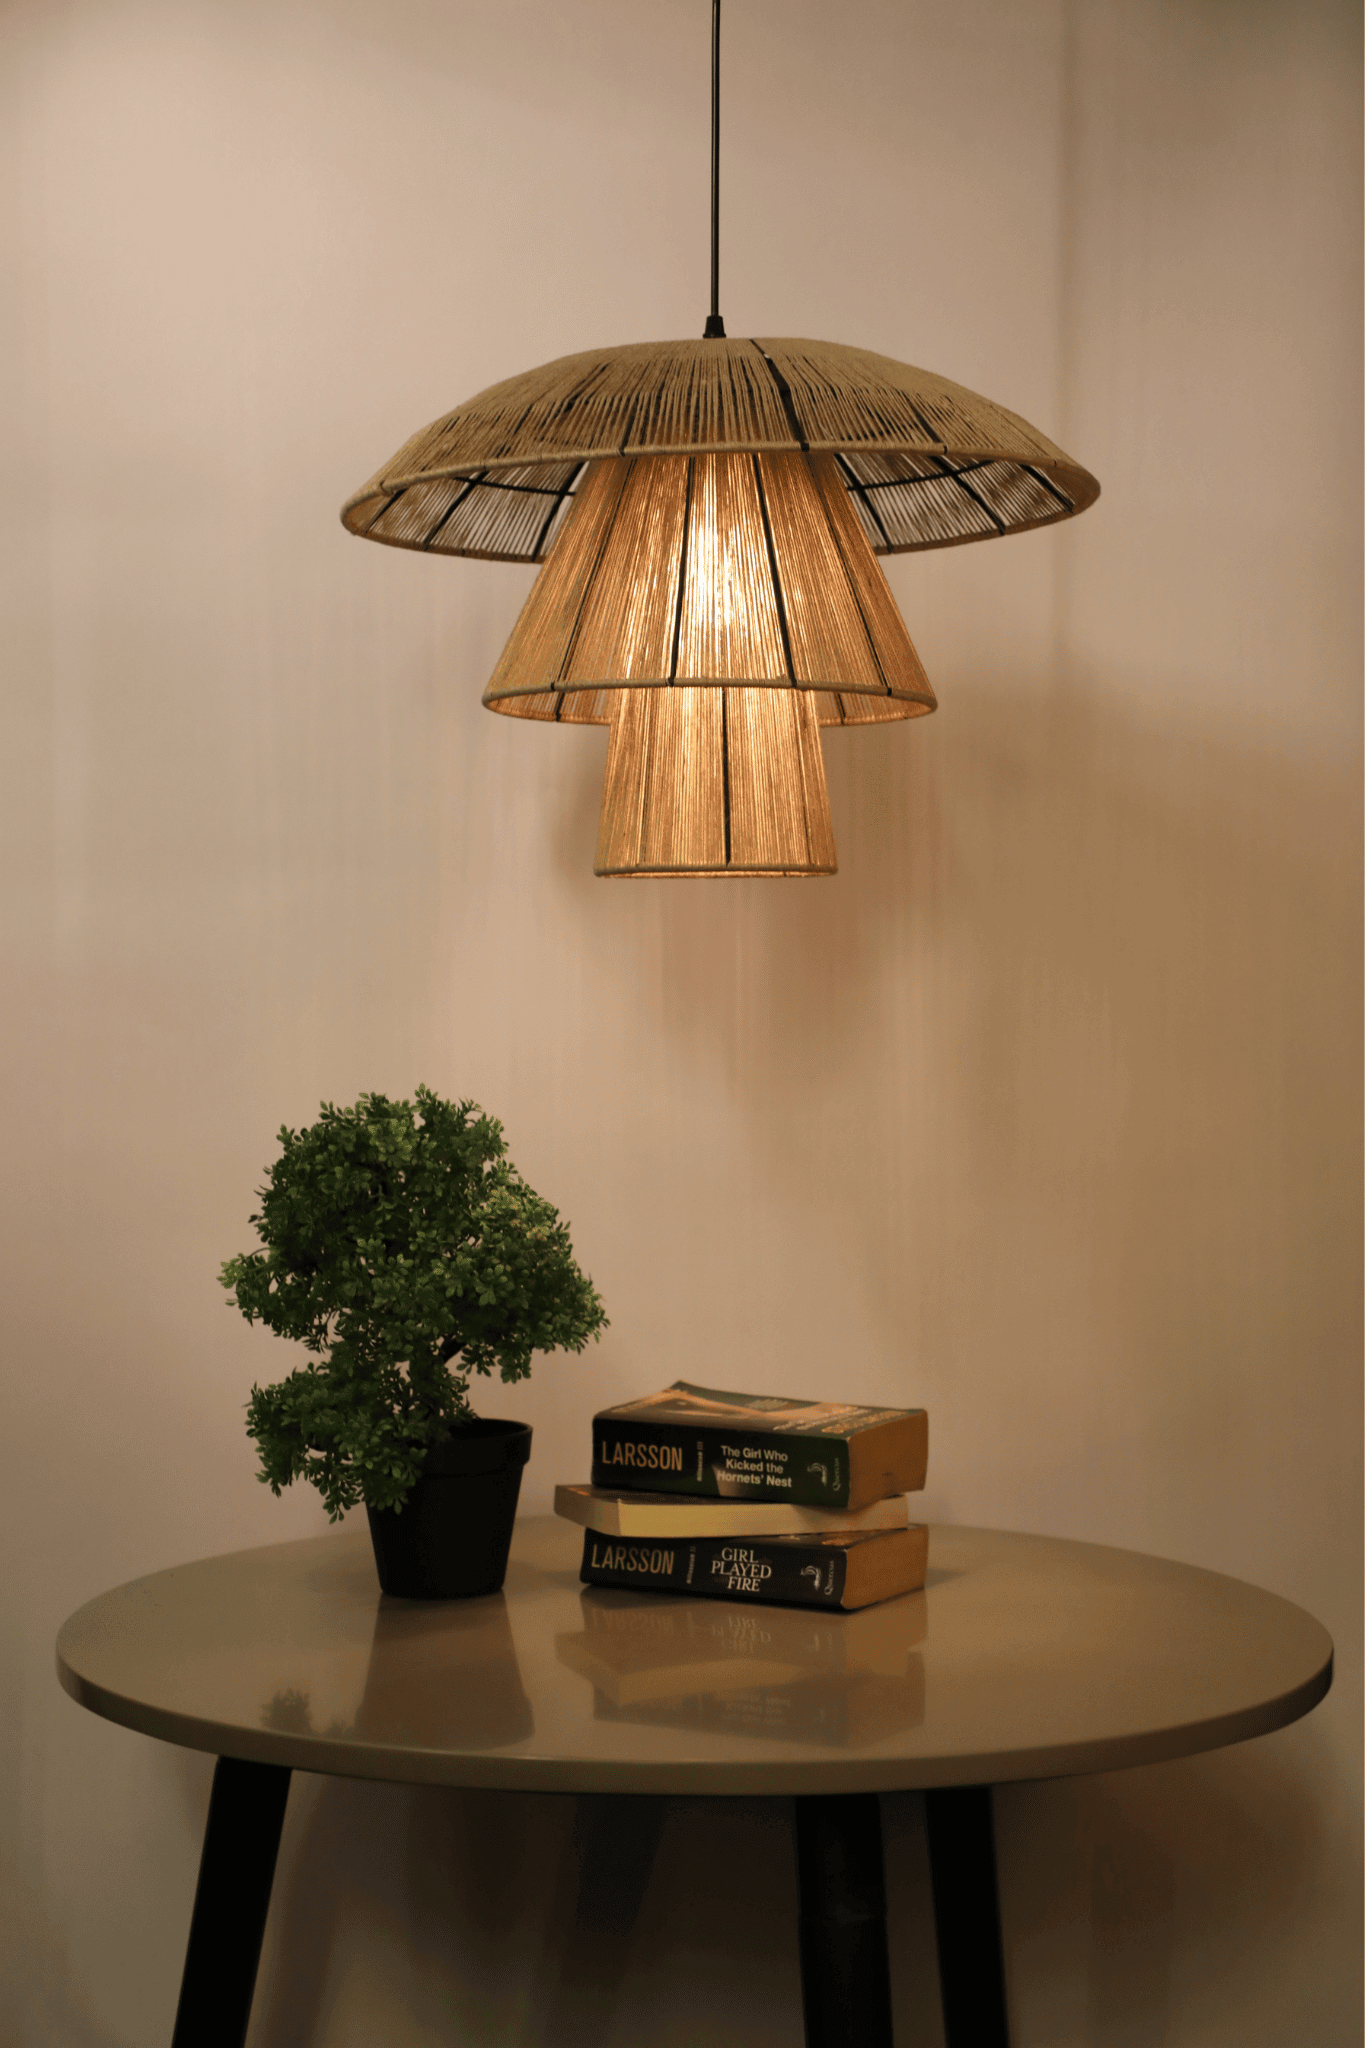 Soleil Handcrafted Pendant Light by The Light Library